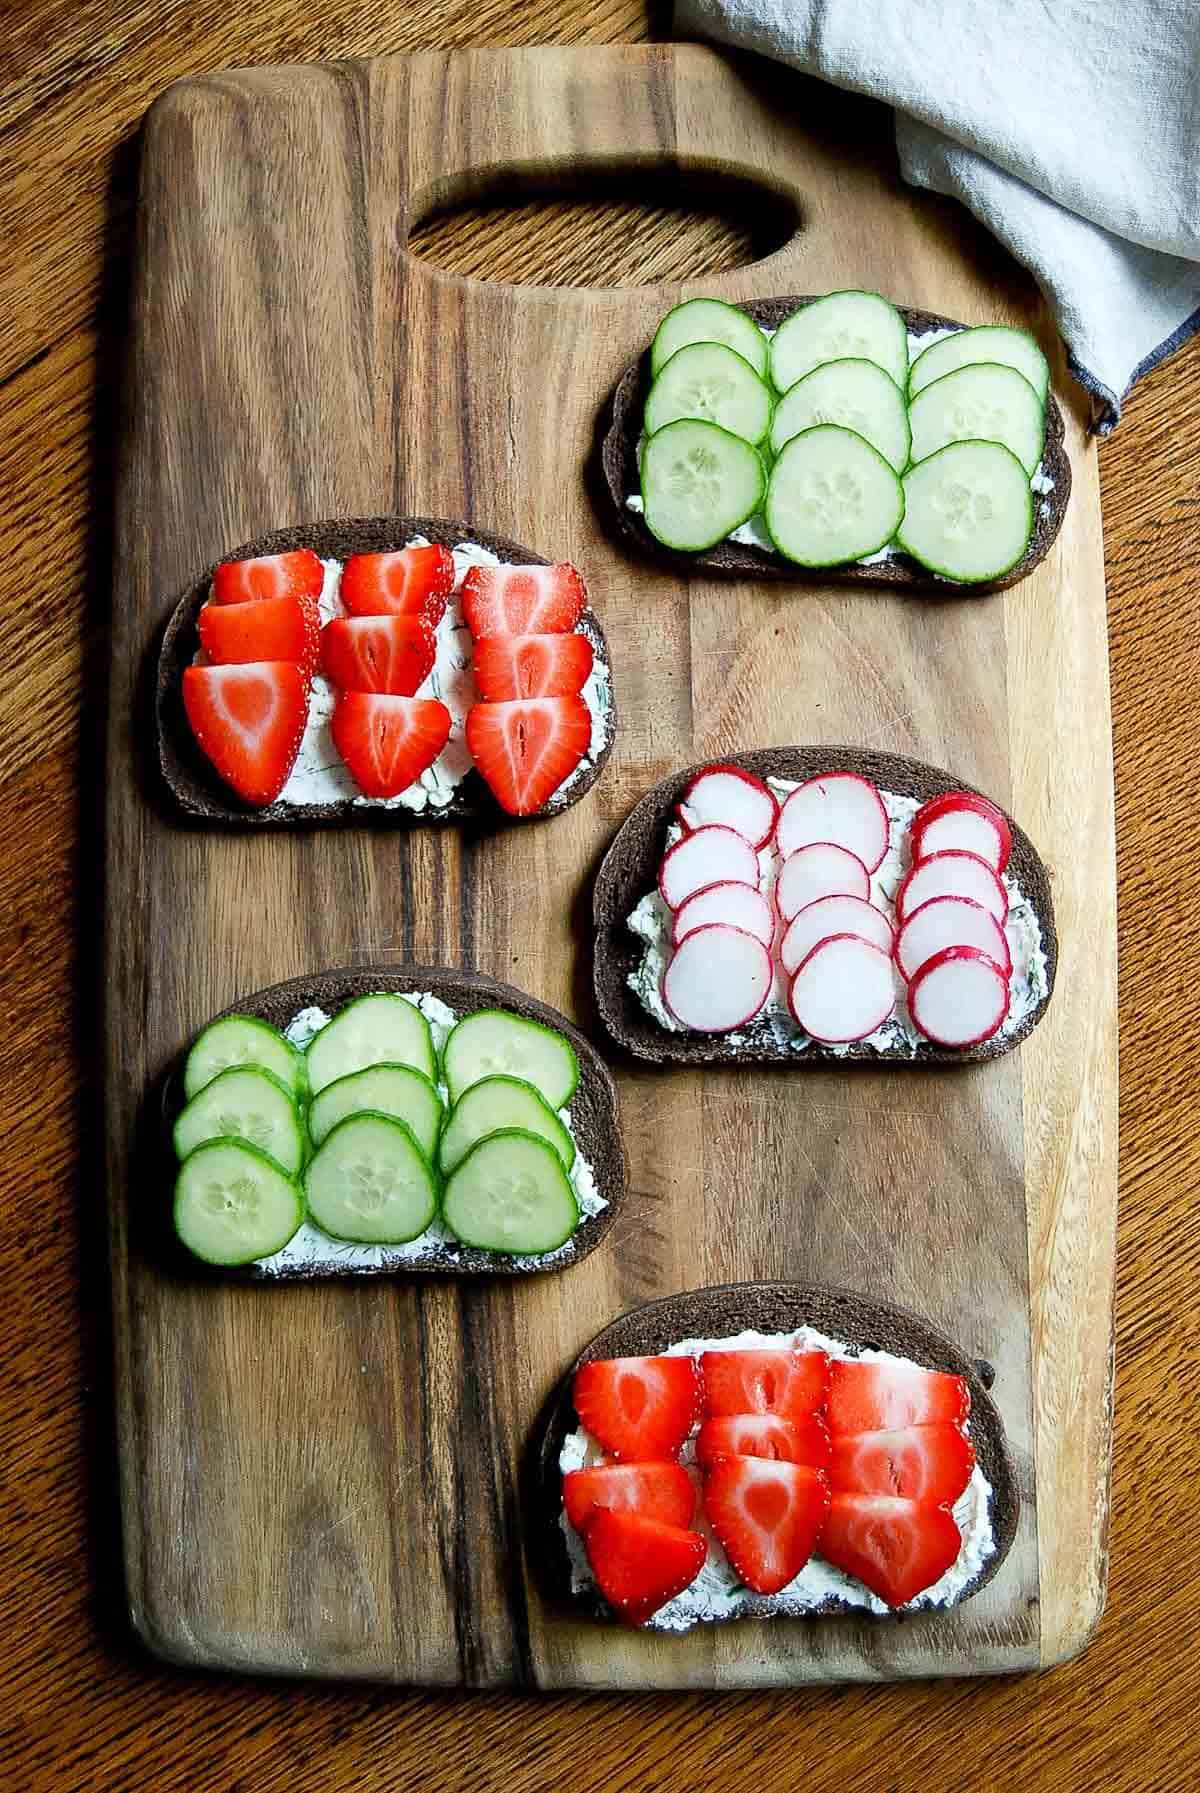 pumpernickel with herbed cheese, cucumber, strawberries and radishes on cutting board.